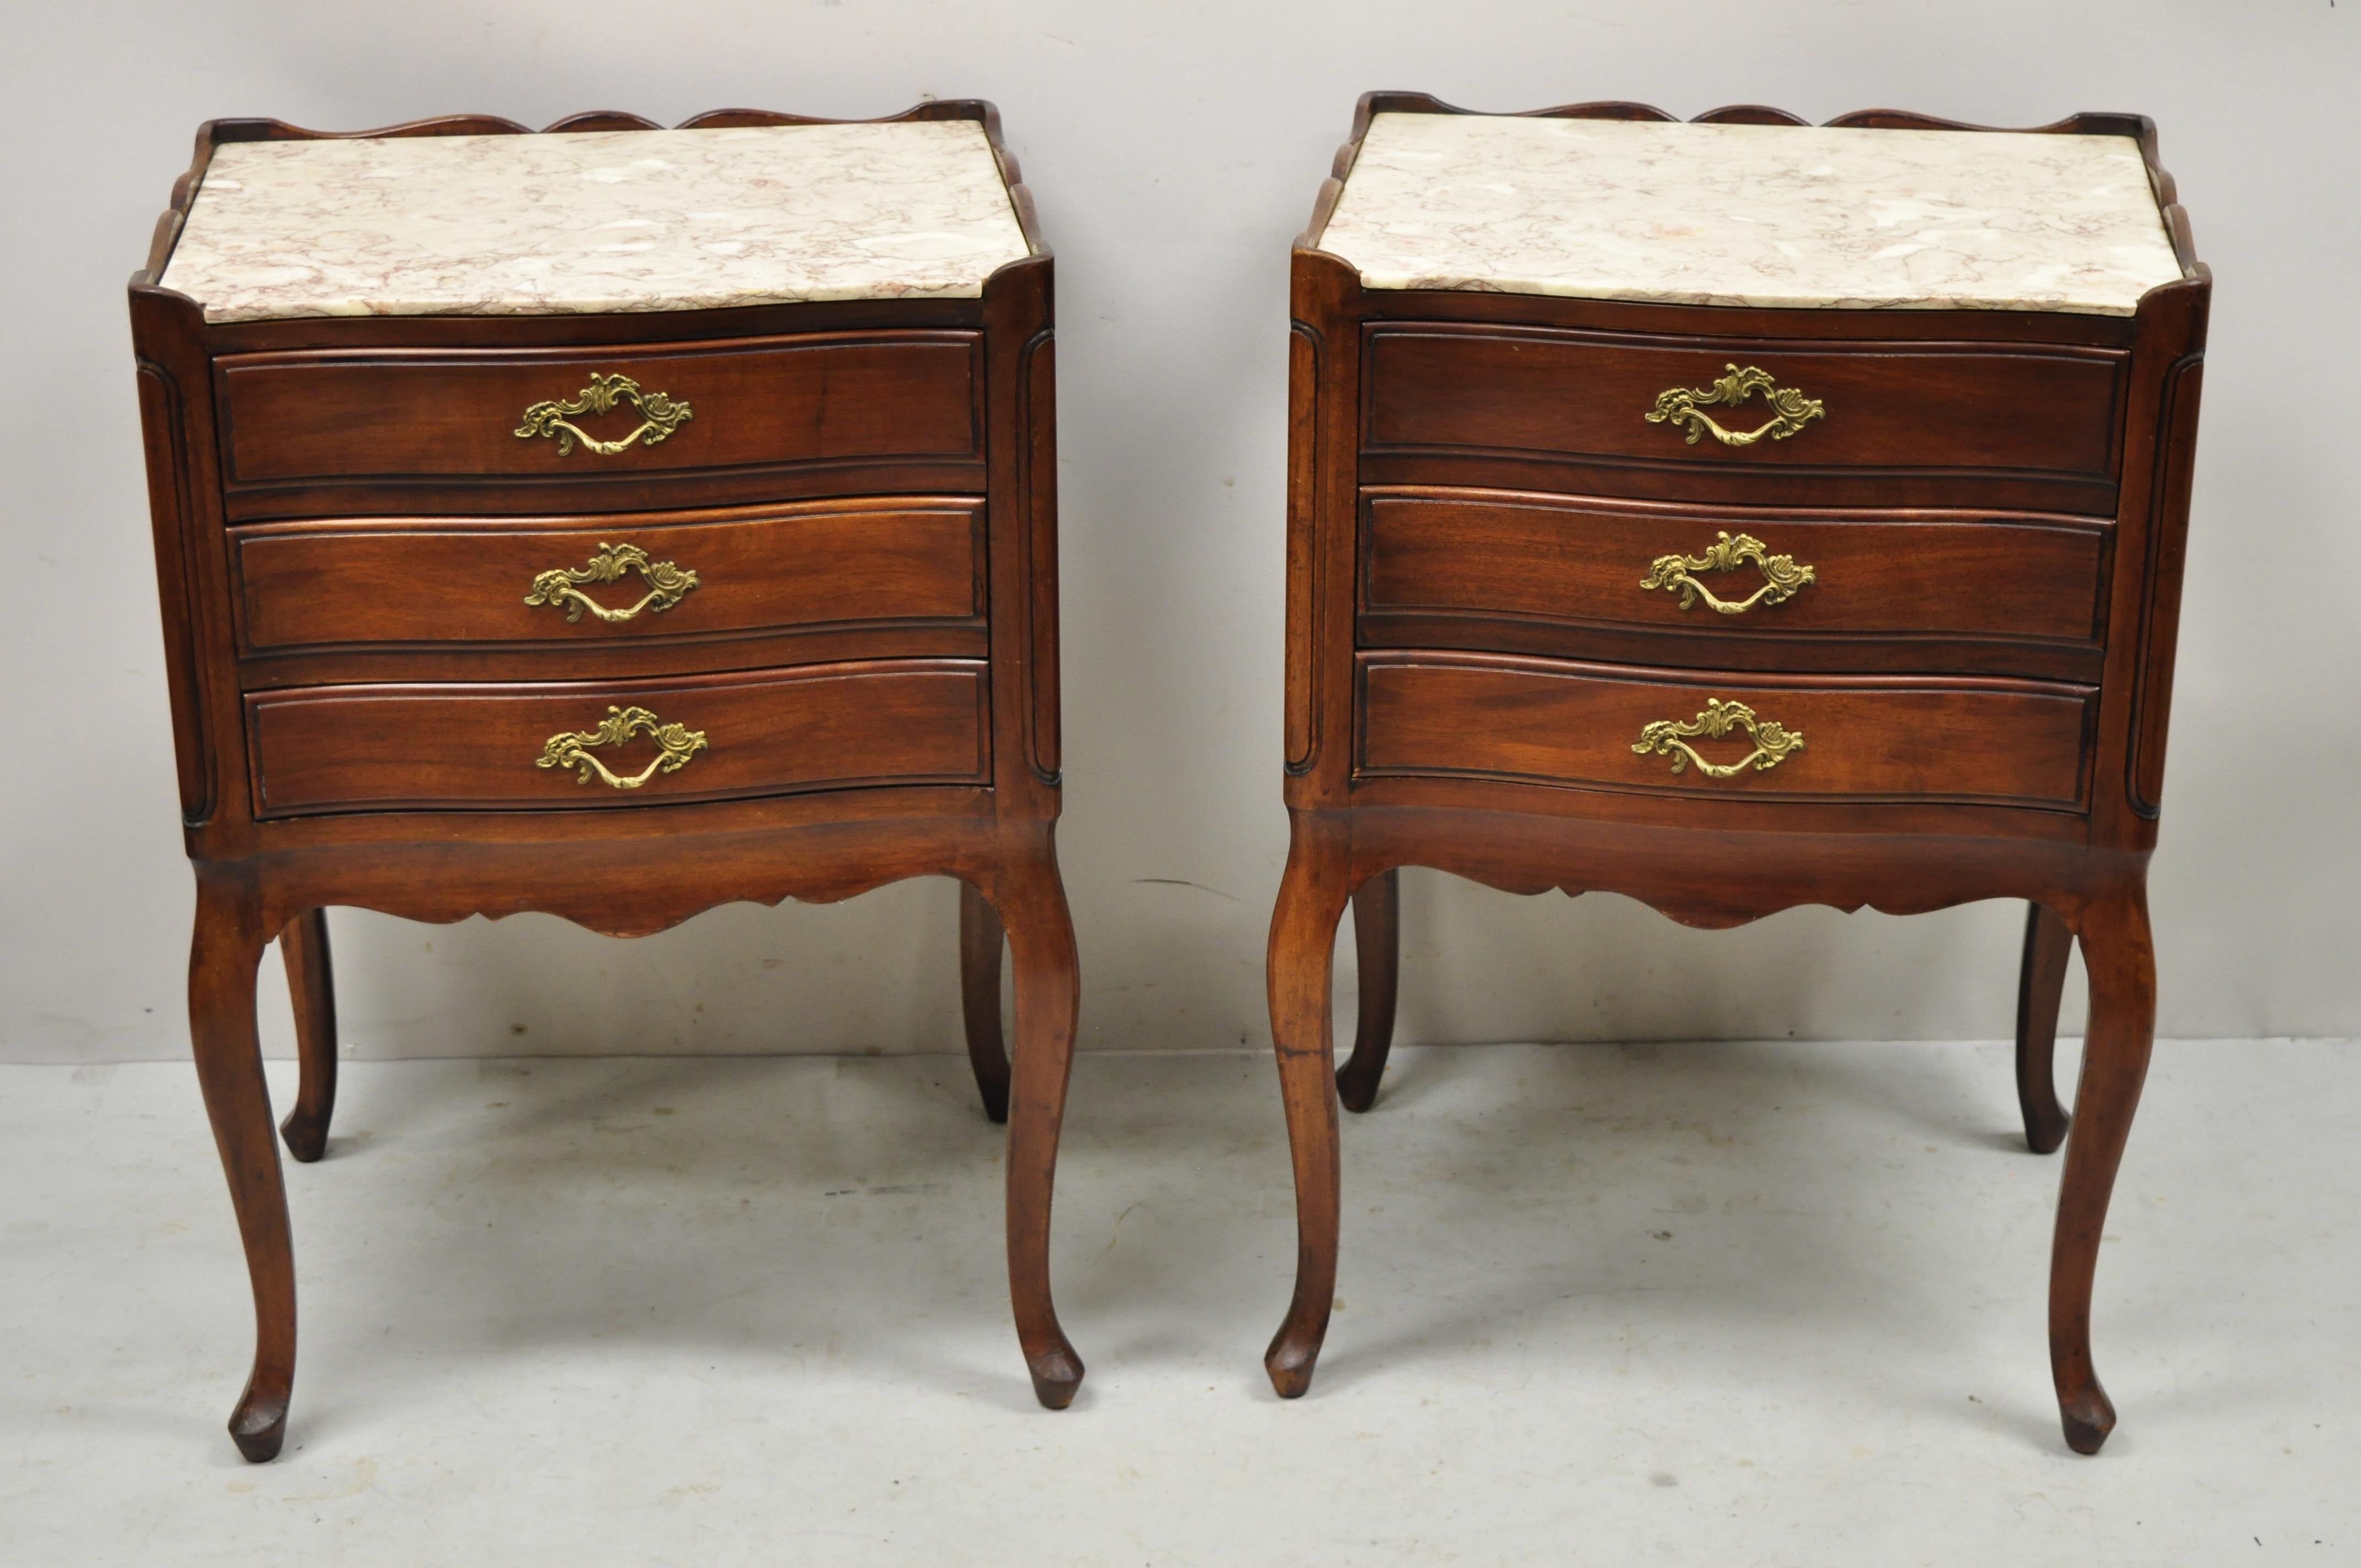 Vintage John Widdicomb French Country Provincial cherry wood pink marble top nightstands - a pair. Item features pink marble top, solid wood construction, beautiful wood grain, nicely carved details, finished back, original stamp, 3 dovetailed